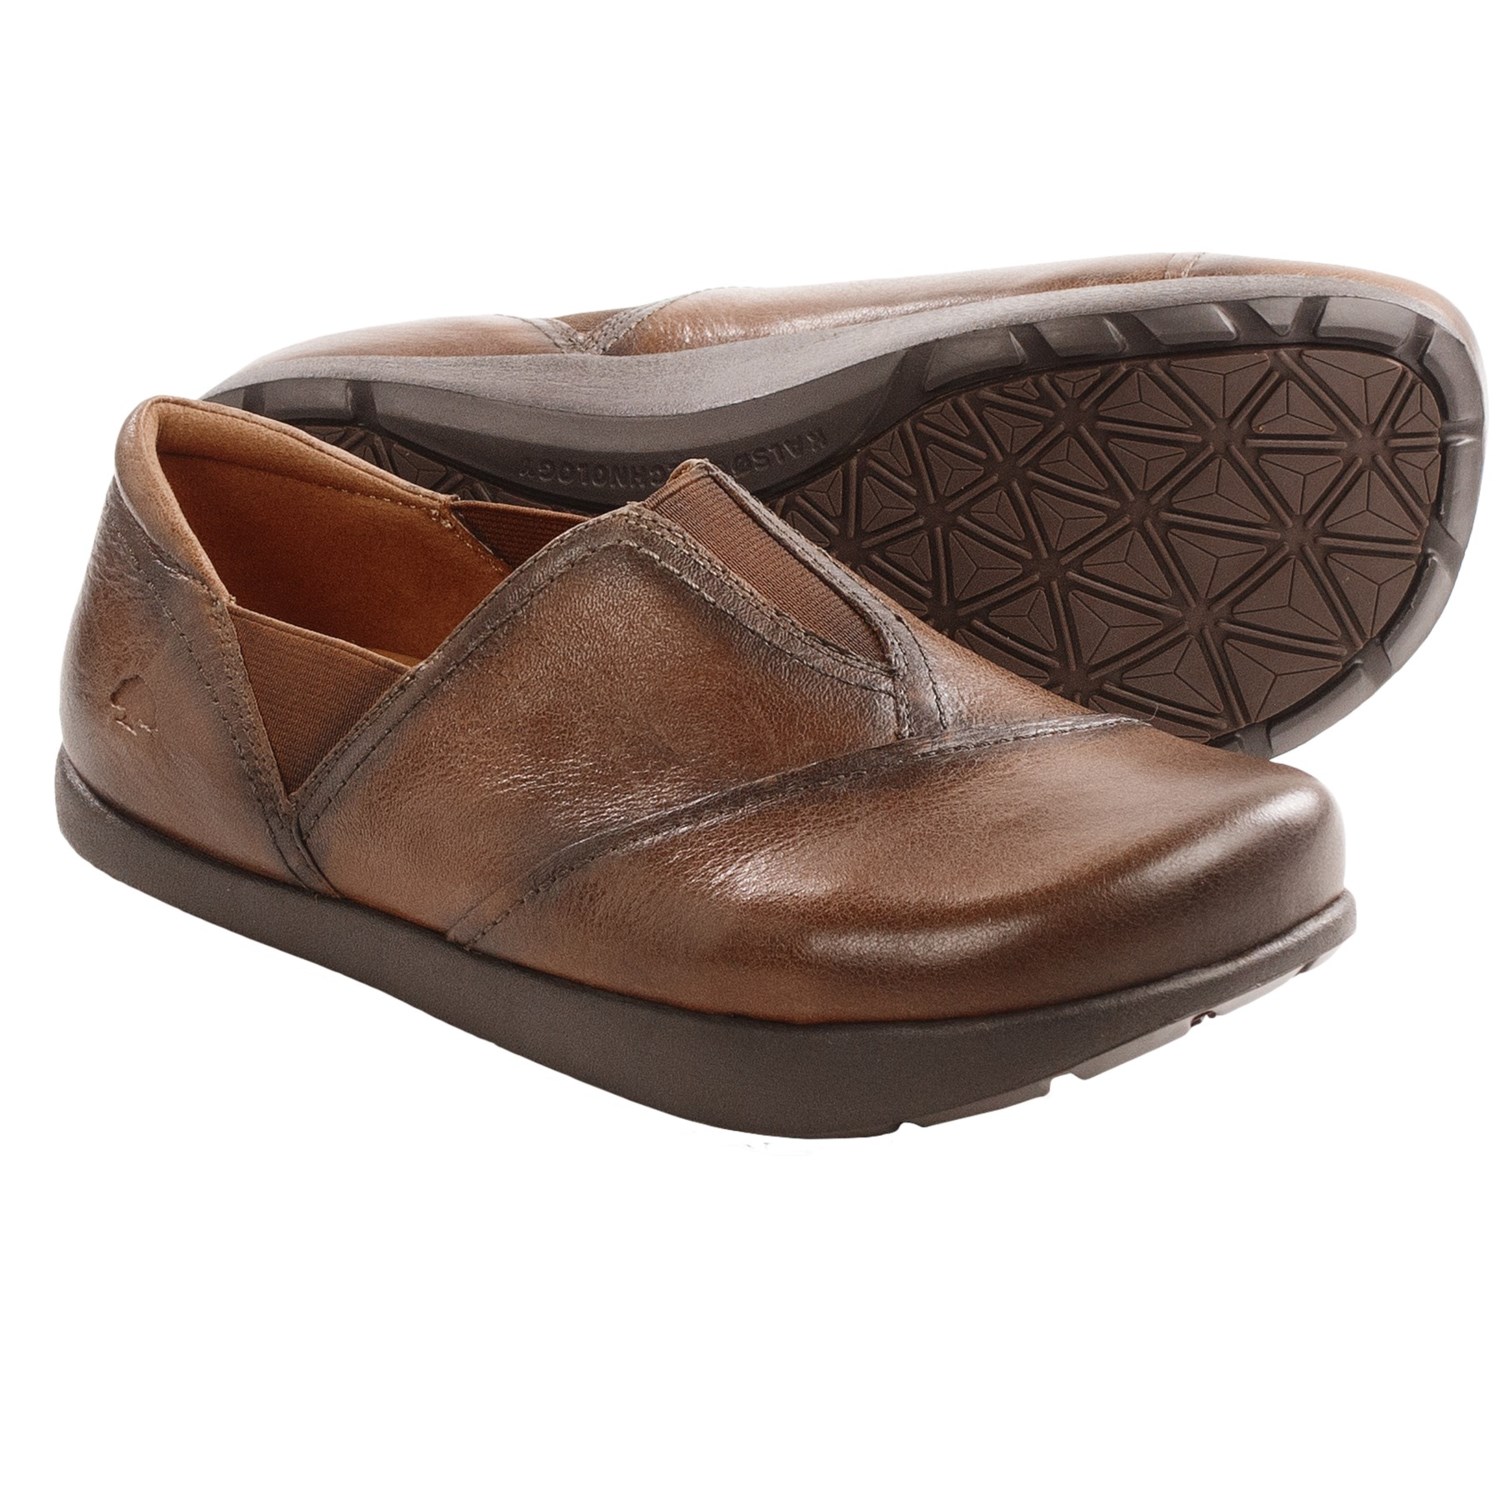 Kalso Earth Shoes Clearance Women | newhairstylesformen2014.com